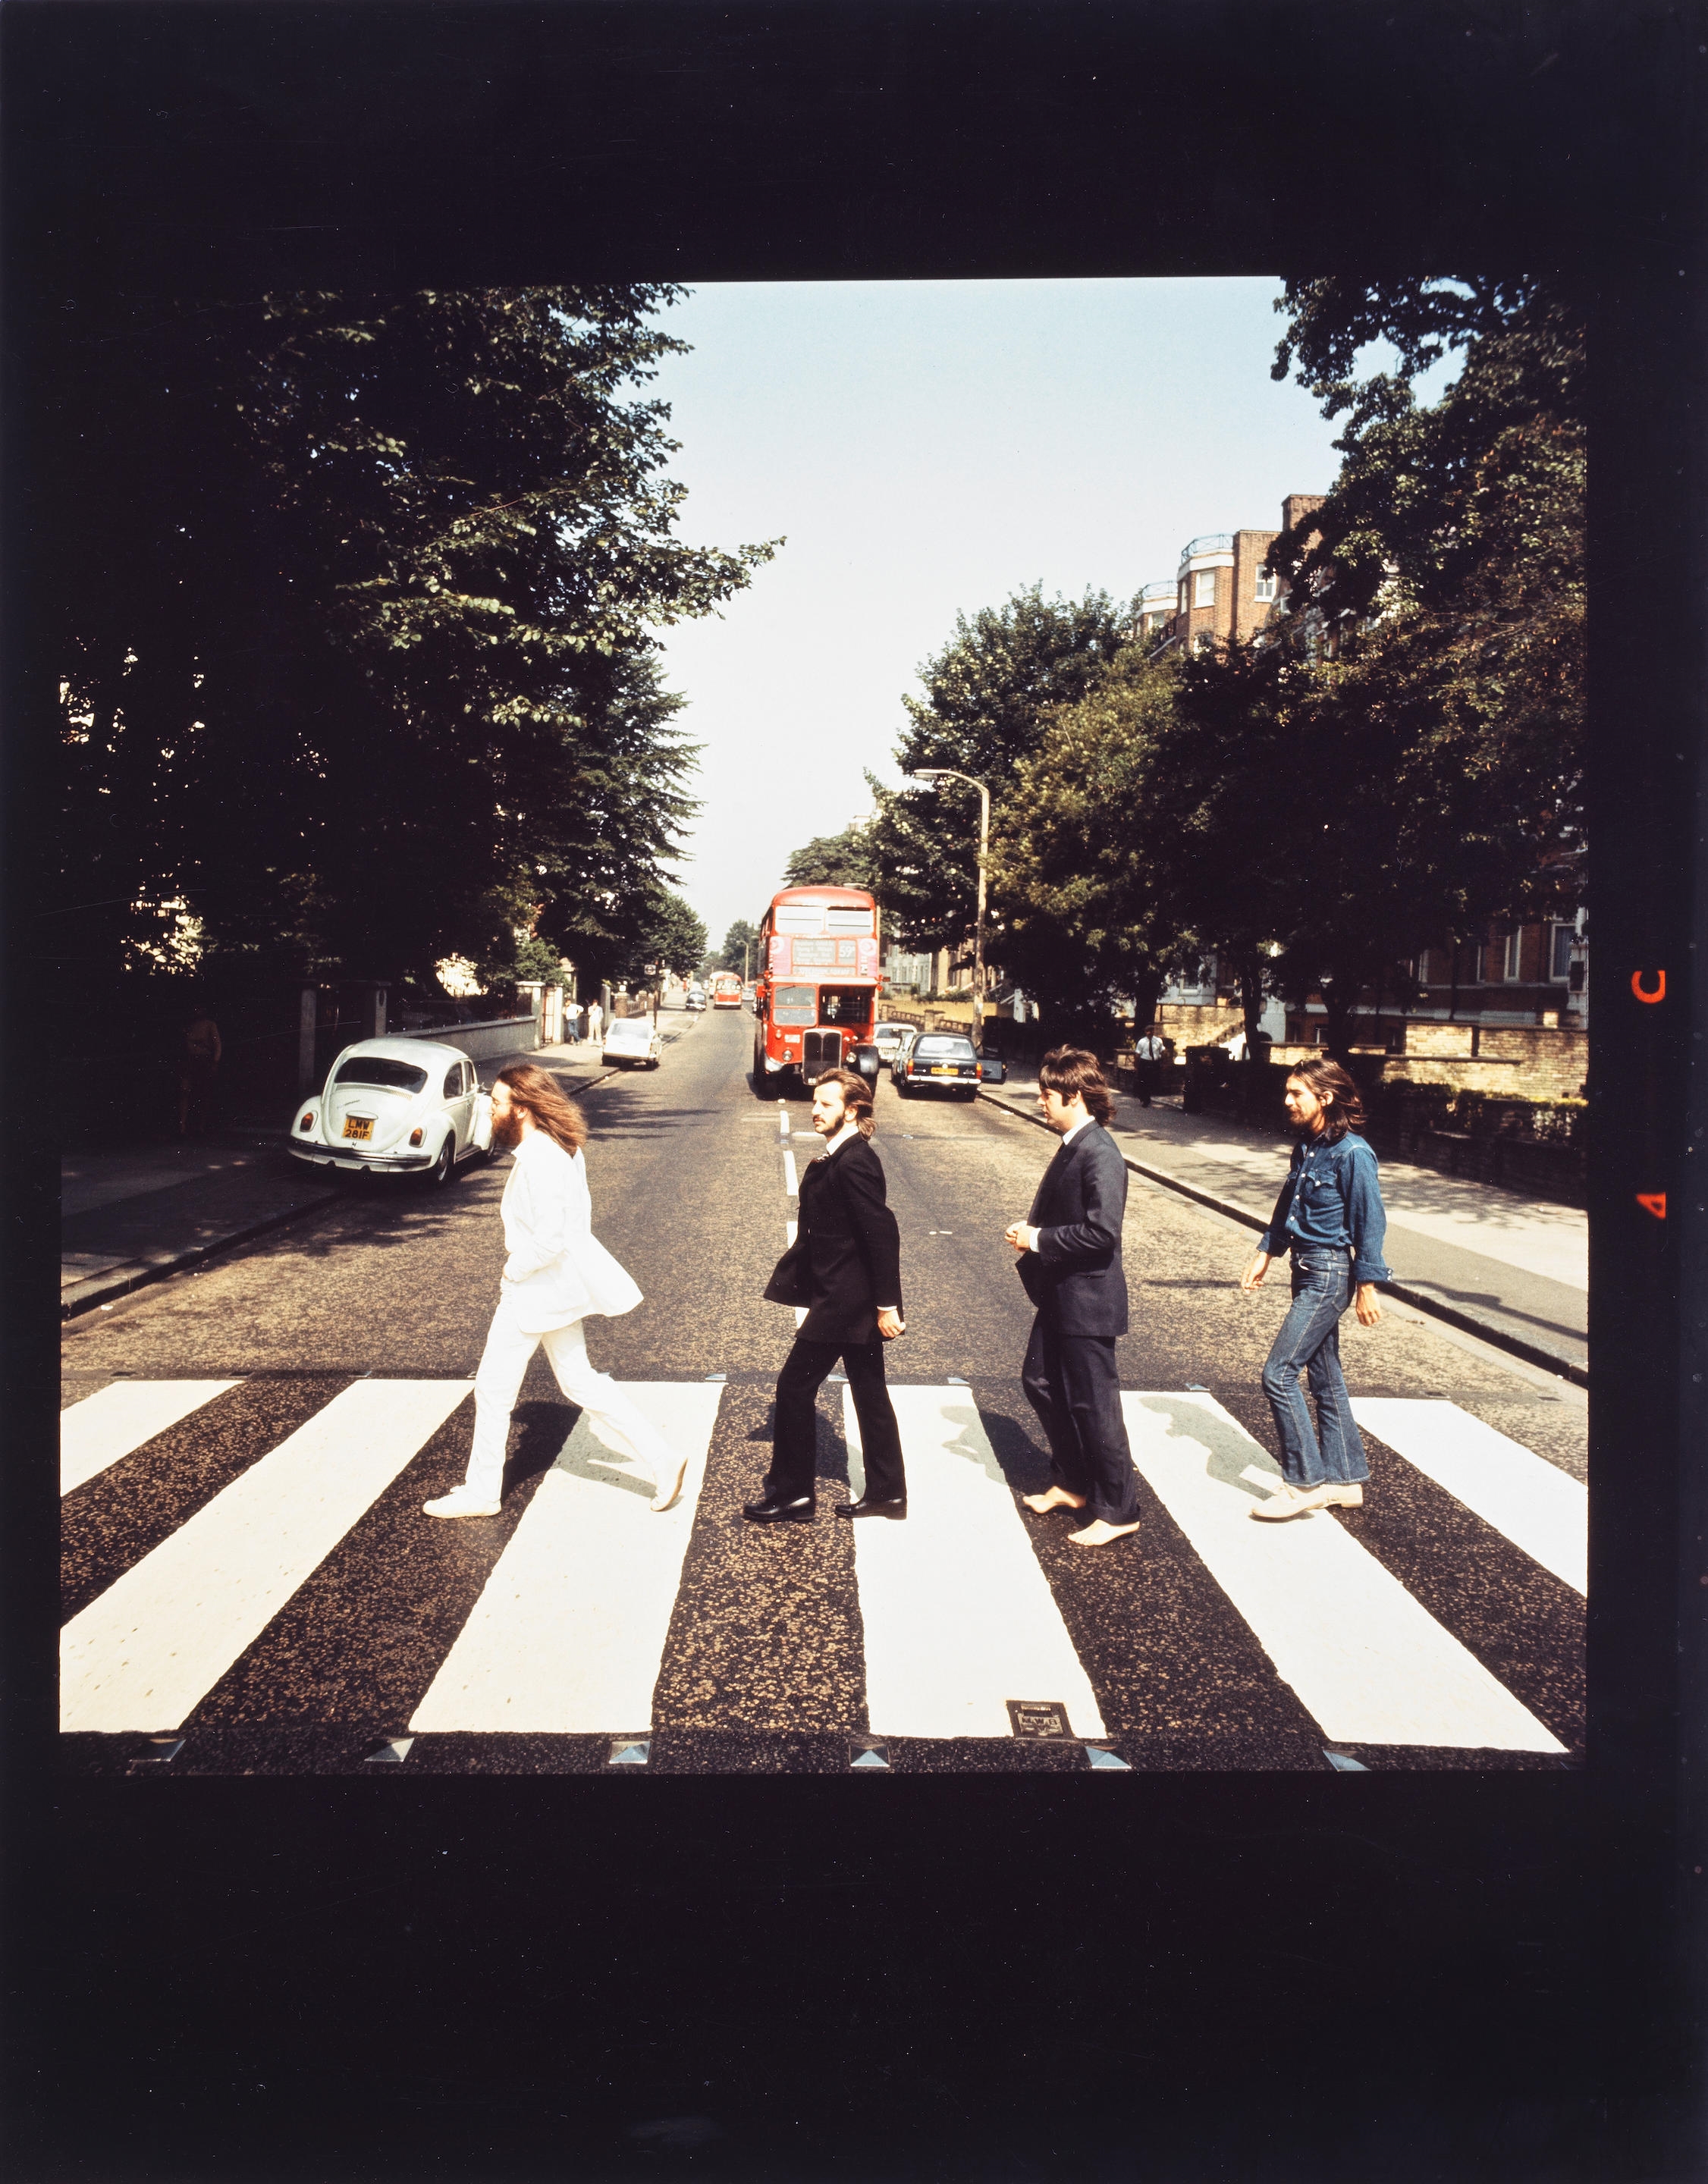 Artwork by Iain MacMillan, The Beatles 'Abbey Road', Made of photographic print